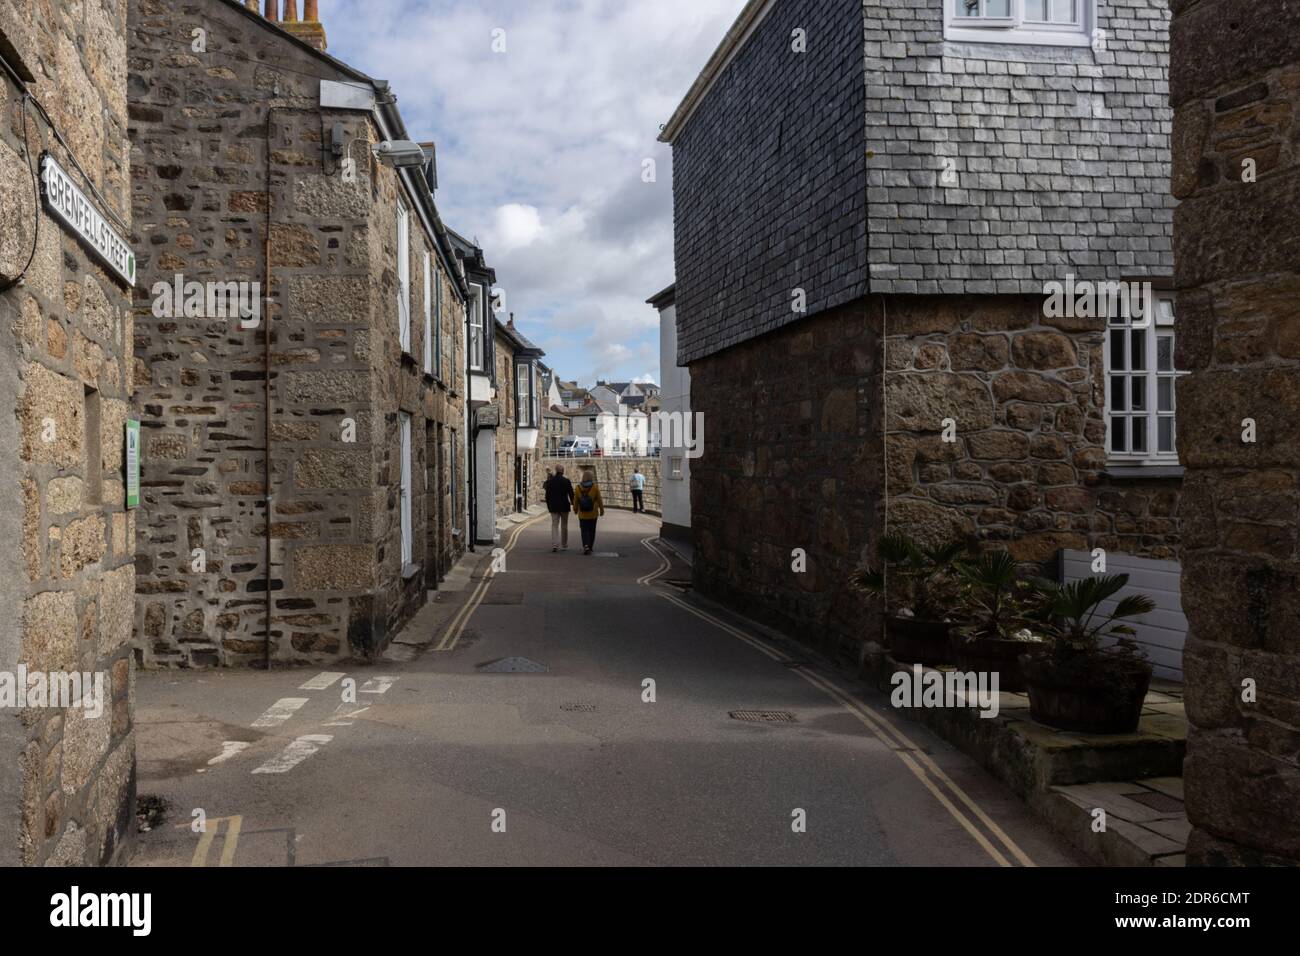 A couple walk hand in hand through a narrow street of granite cottages in traditional fishing village of Mousehole, Cornwall Stock Photo